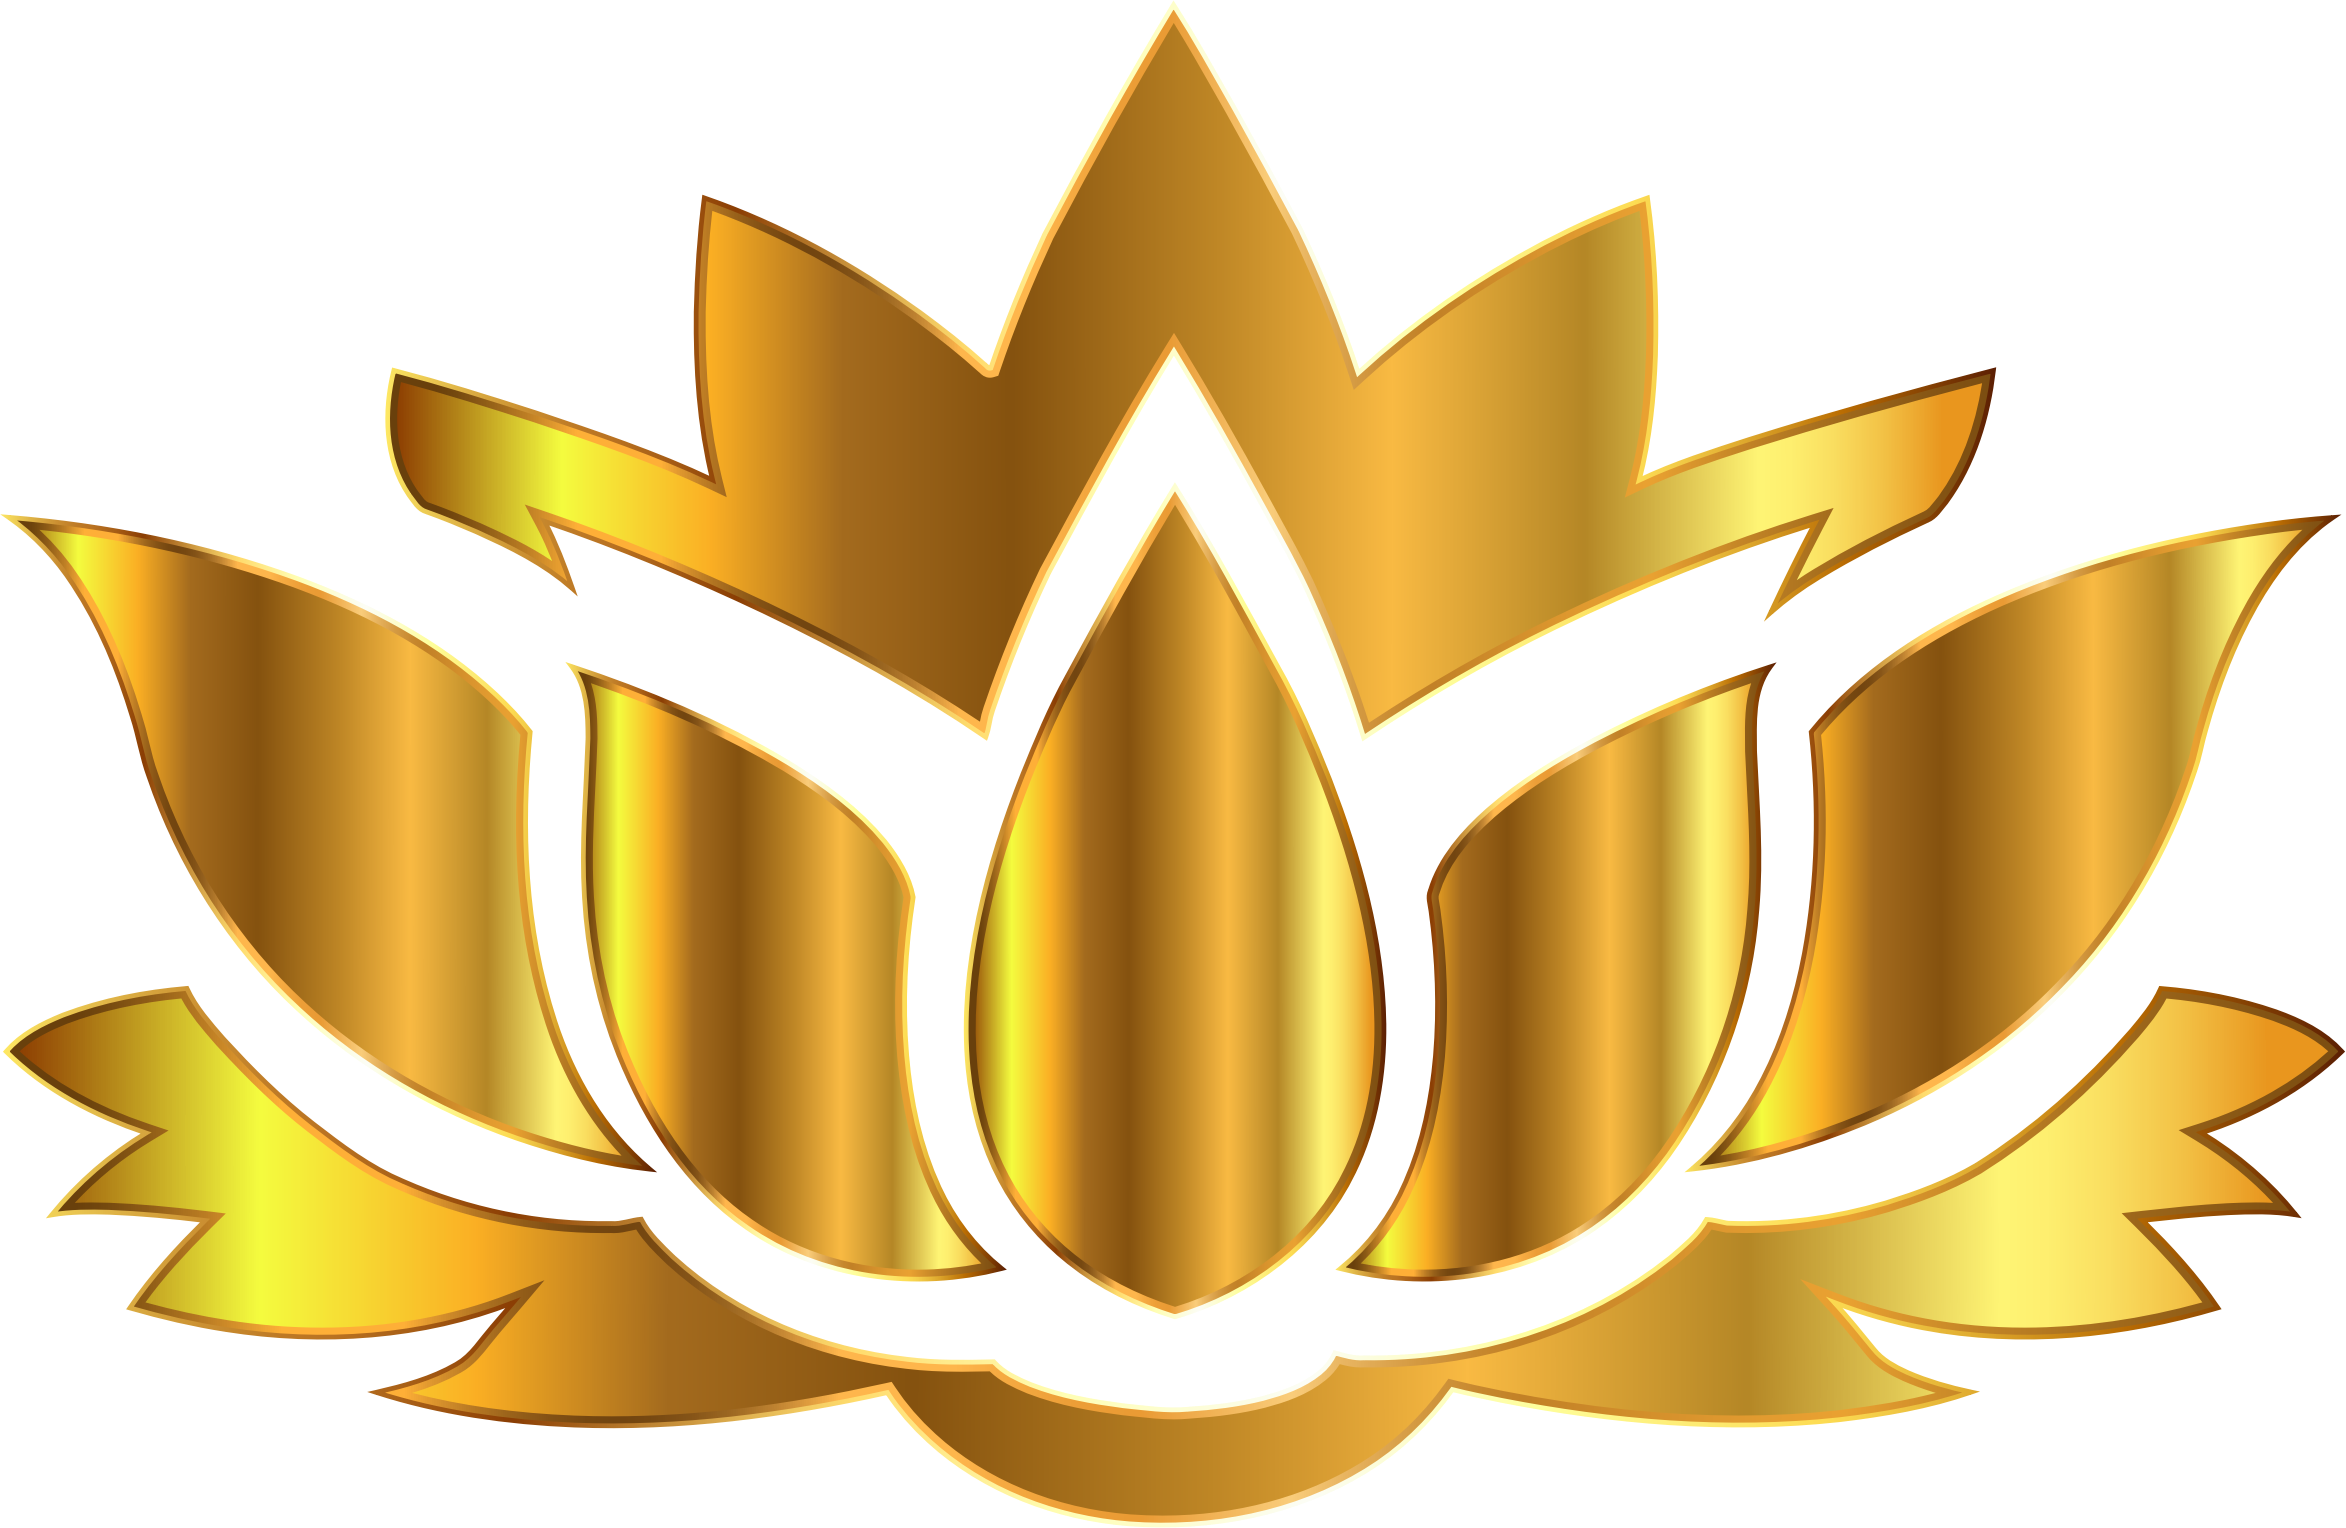 This Free Icons Png Design Of Gold Lotus Flower Silhouette - Gold Lotus Flower Logo (2346x1528)